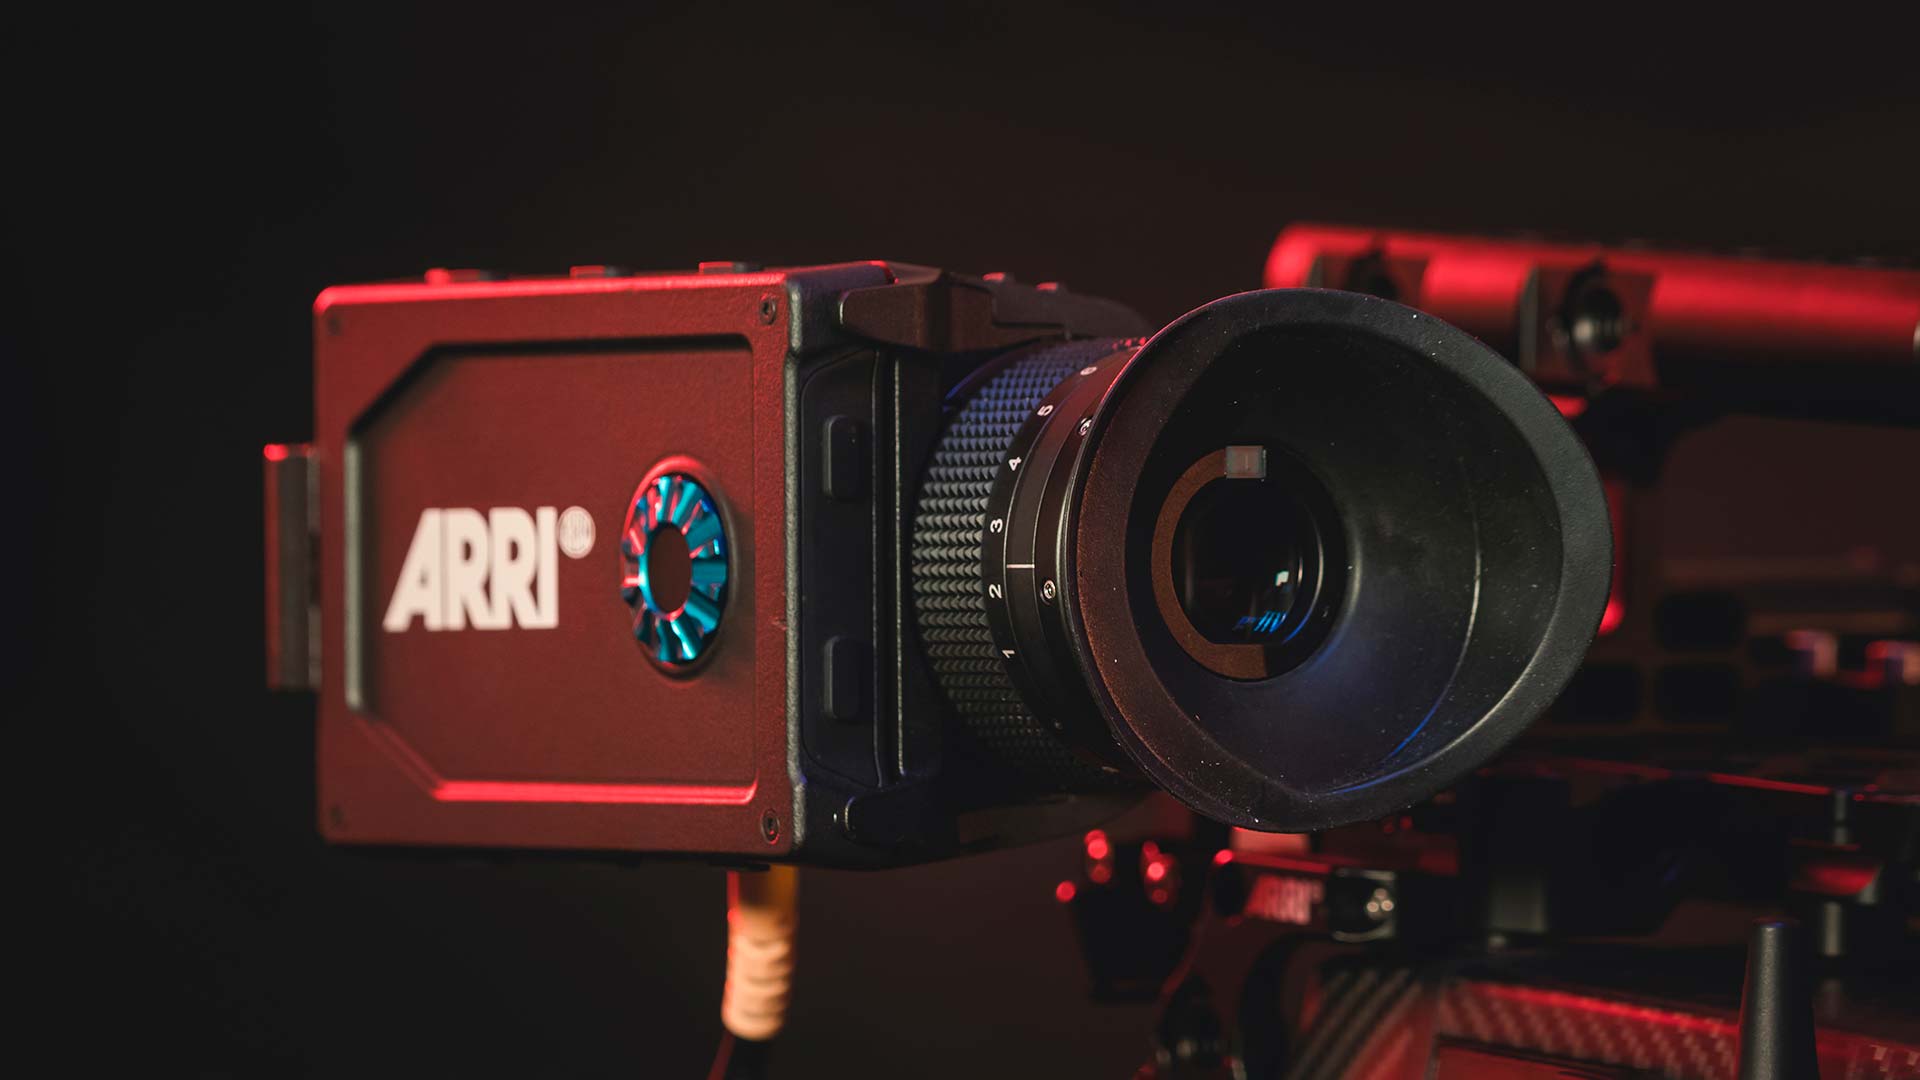 The film and video production industry is going through a boom. Image: 